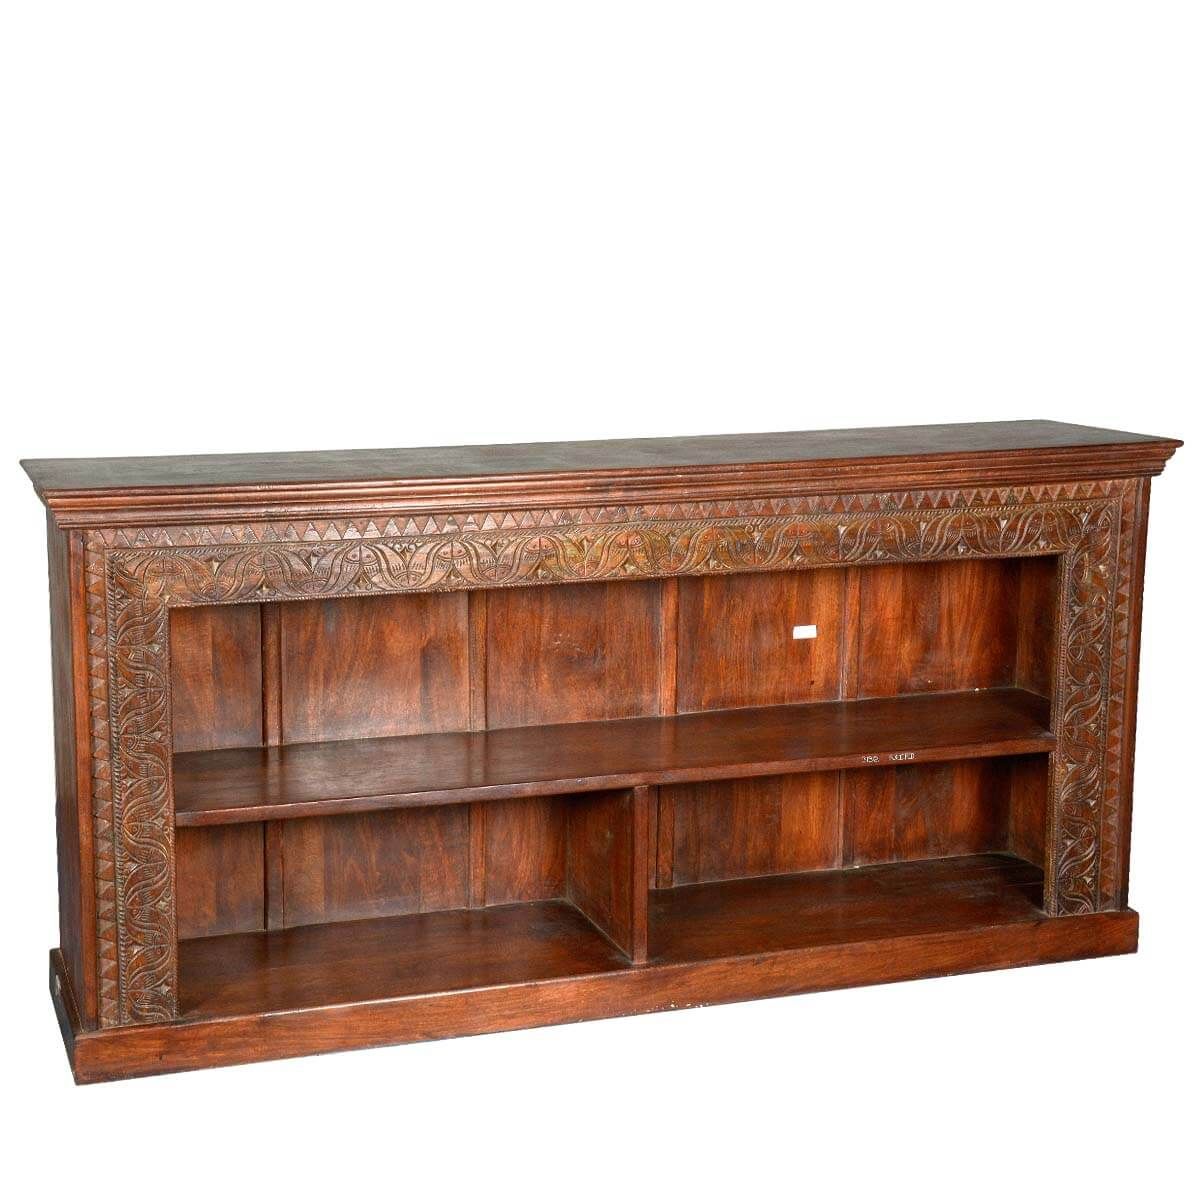 Large Hand Carved Reclaimed Wood Bookcase 83" Long Tv Within Long Tv Stands (View 8 of 15)